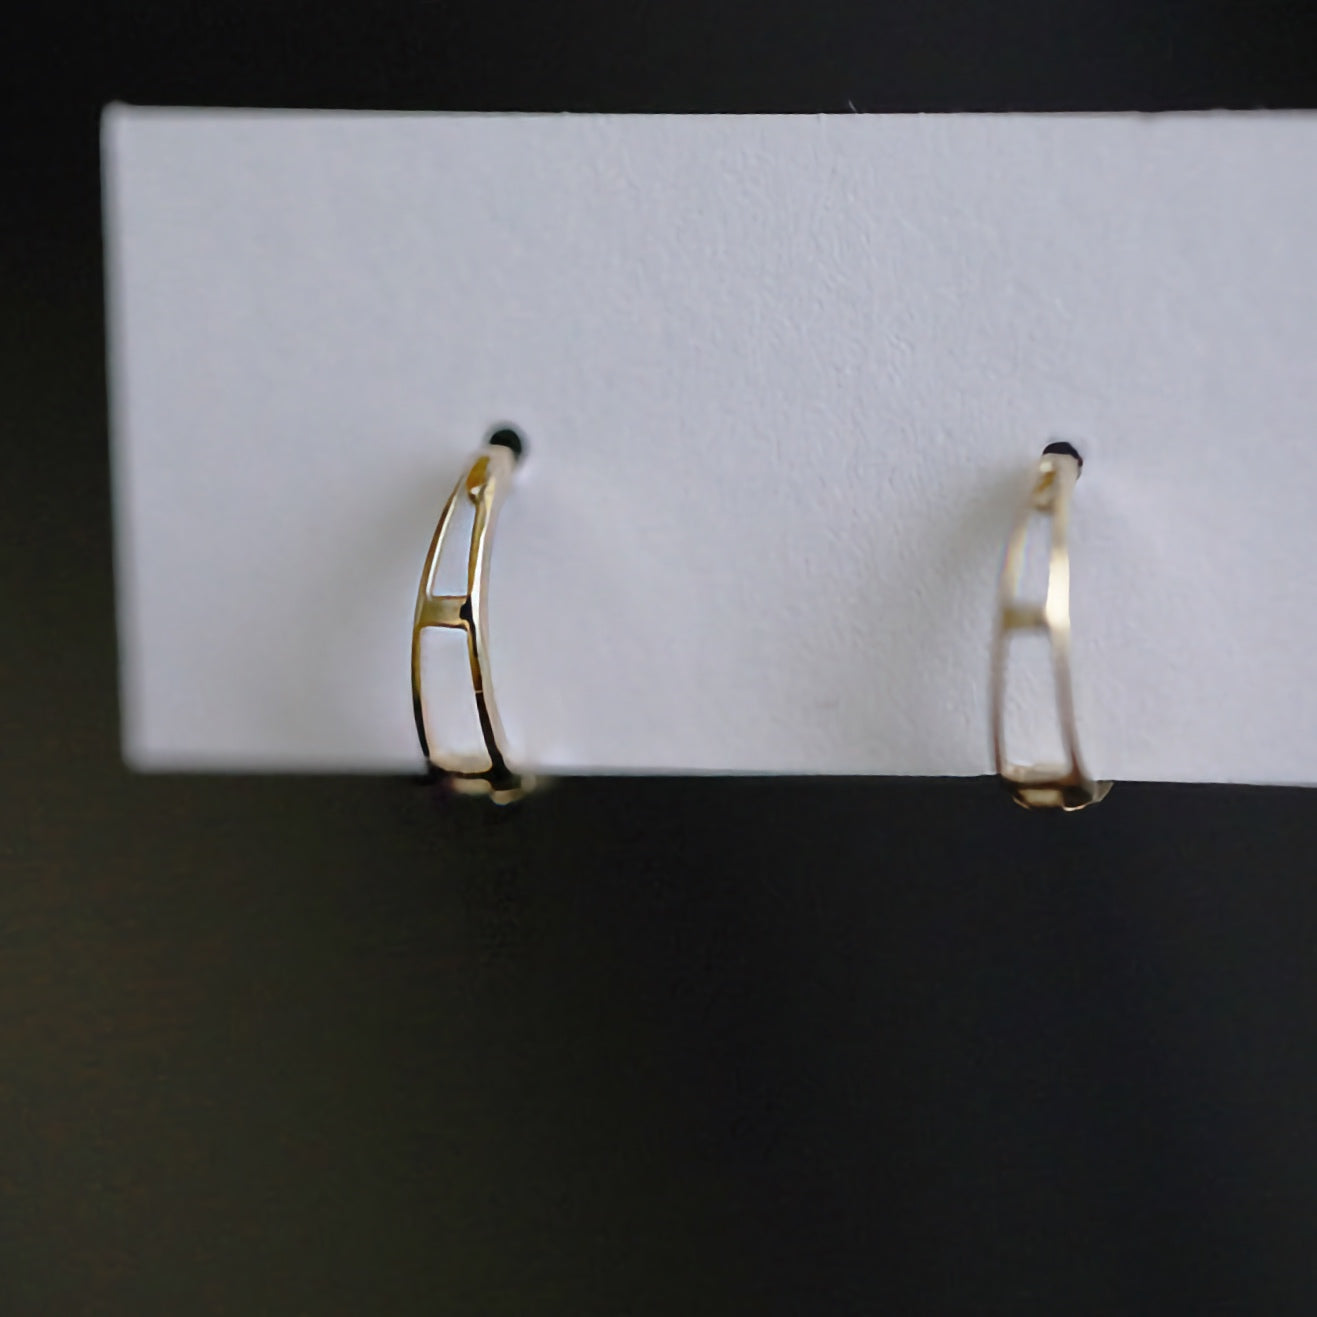 9ct Solid Gold Minimalist Hoops 9K Birthday Earrings Minimalist Jewelry Gift Ready to Dispatch Gold Accessories